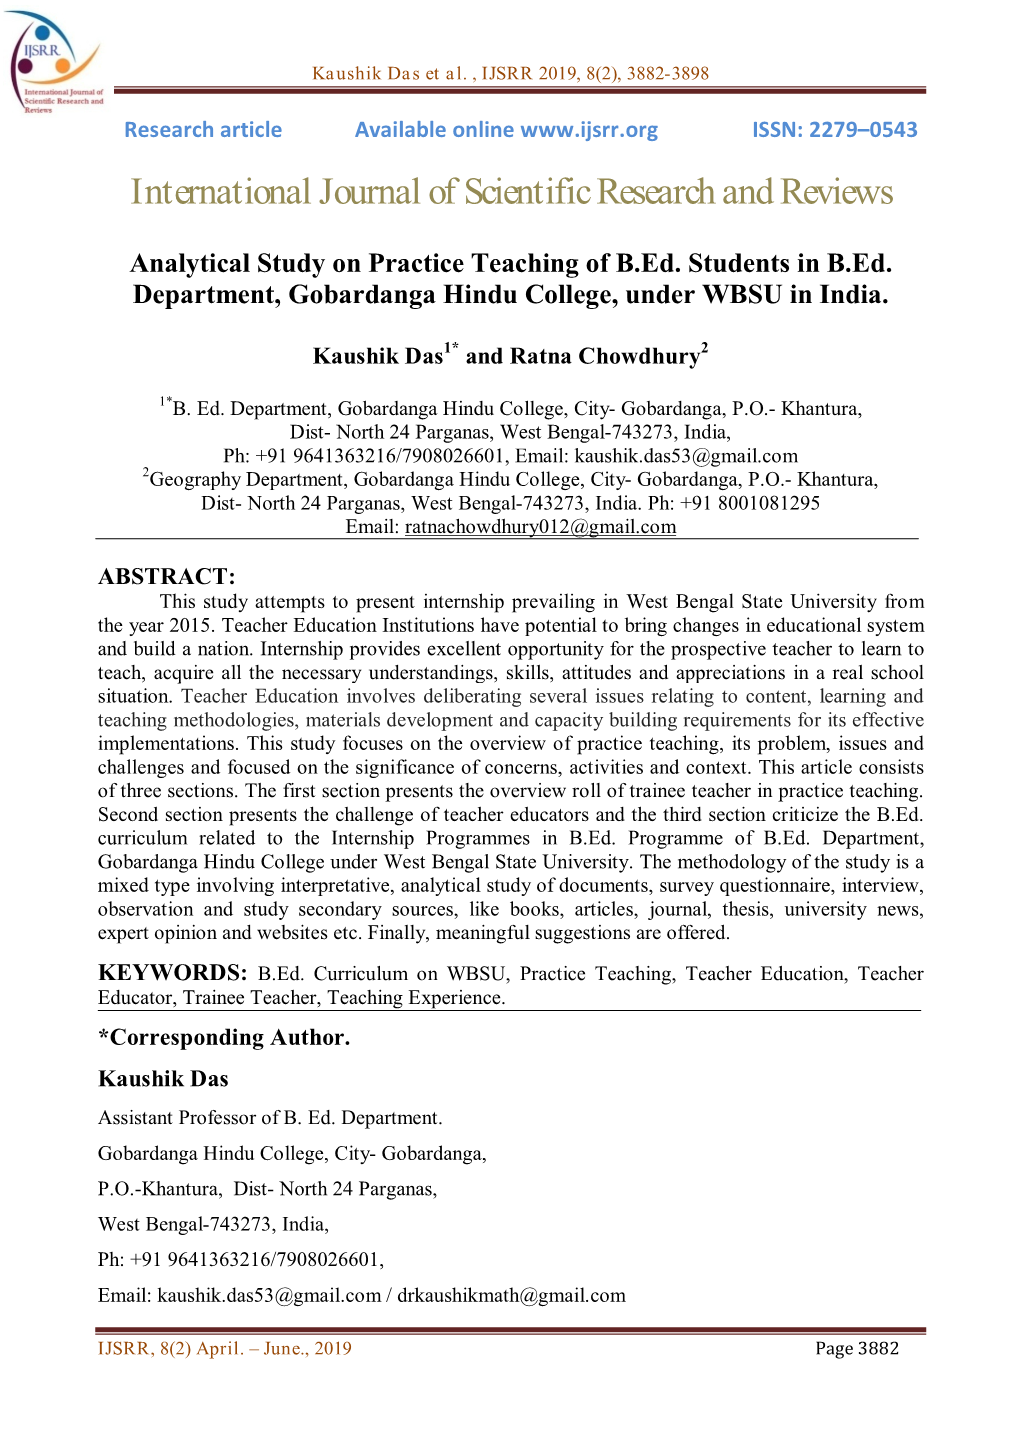 Analytical Study on Practice Teaching of B.Ed. Students in B.Ed